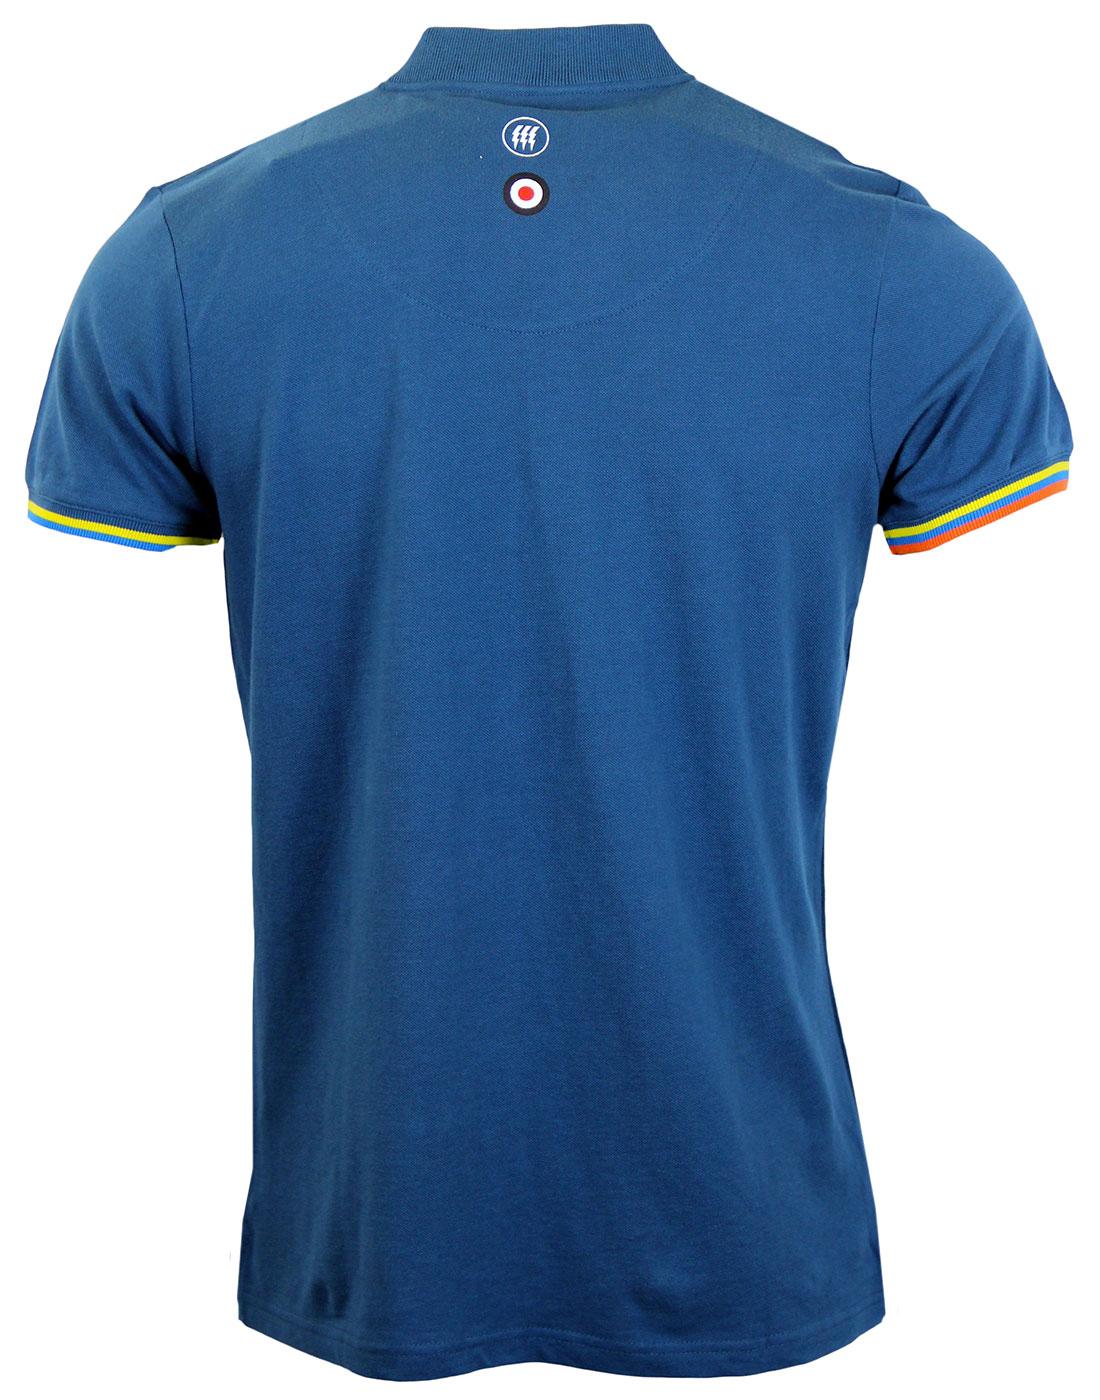 FLY53 Musette Retro Indie Mod Zip Neck Cycling T-shirt Dark Blue